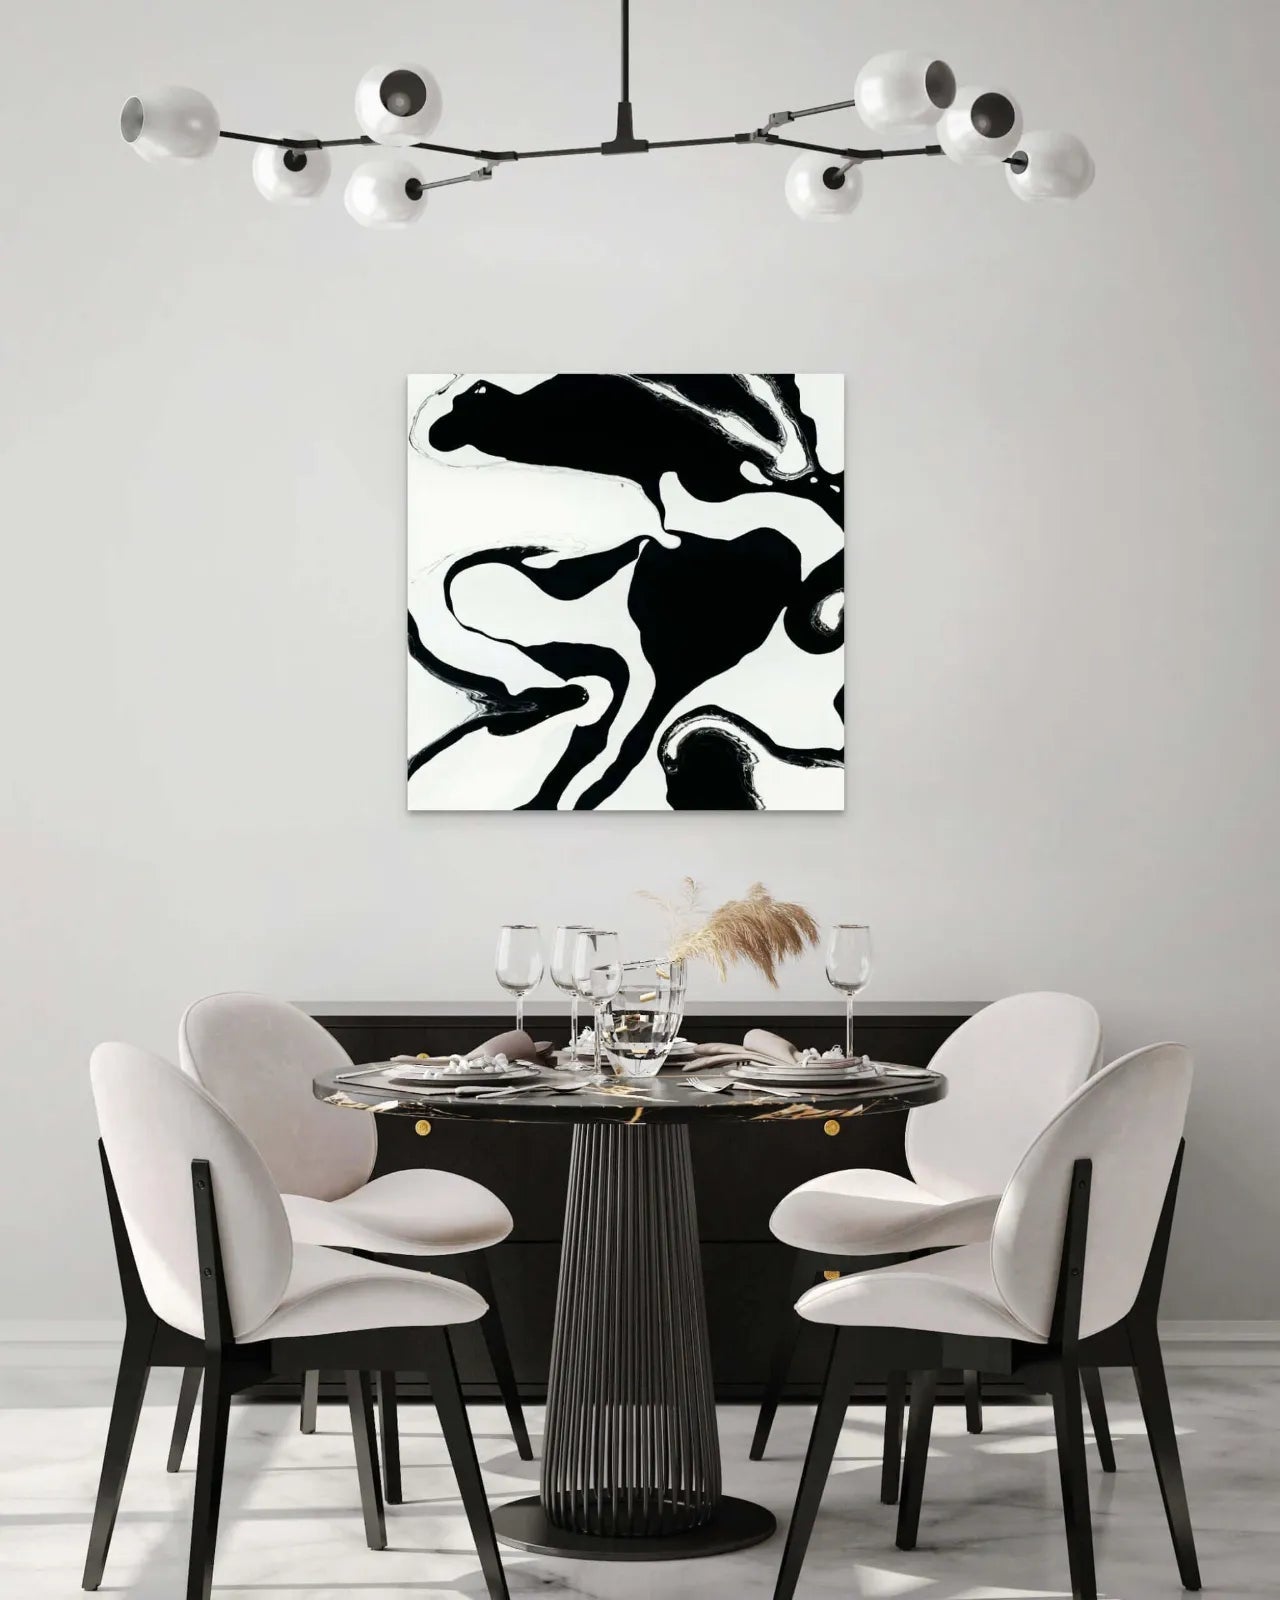    Abstract-Artwork-by-Sung-Lee-Nature-Series-Africa-1-Dining-Room-Chromaluxe-Limited-Edition-Print